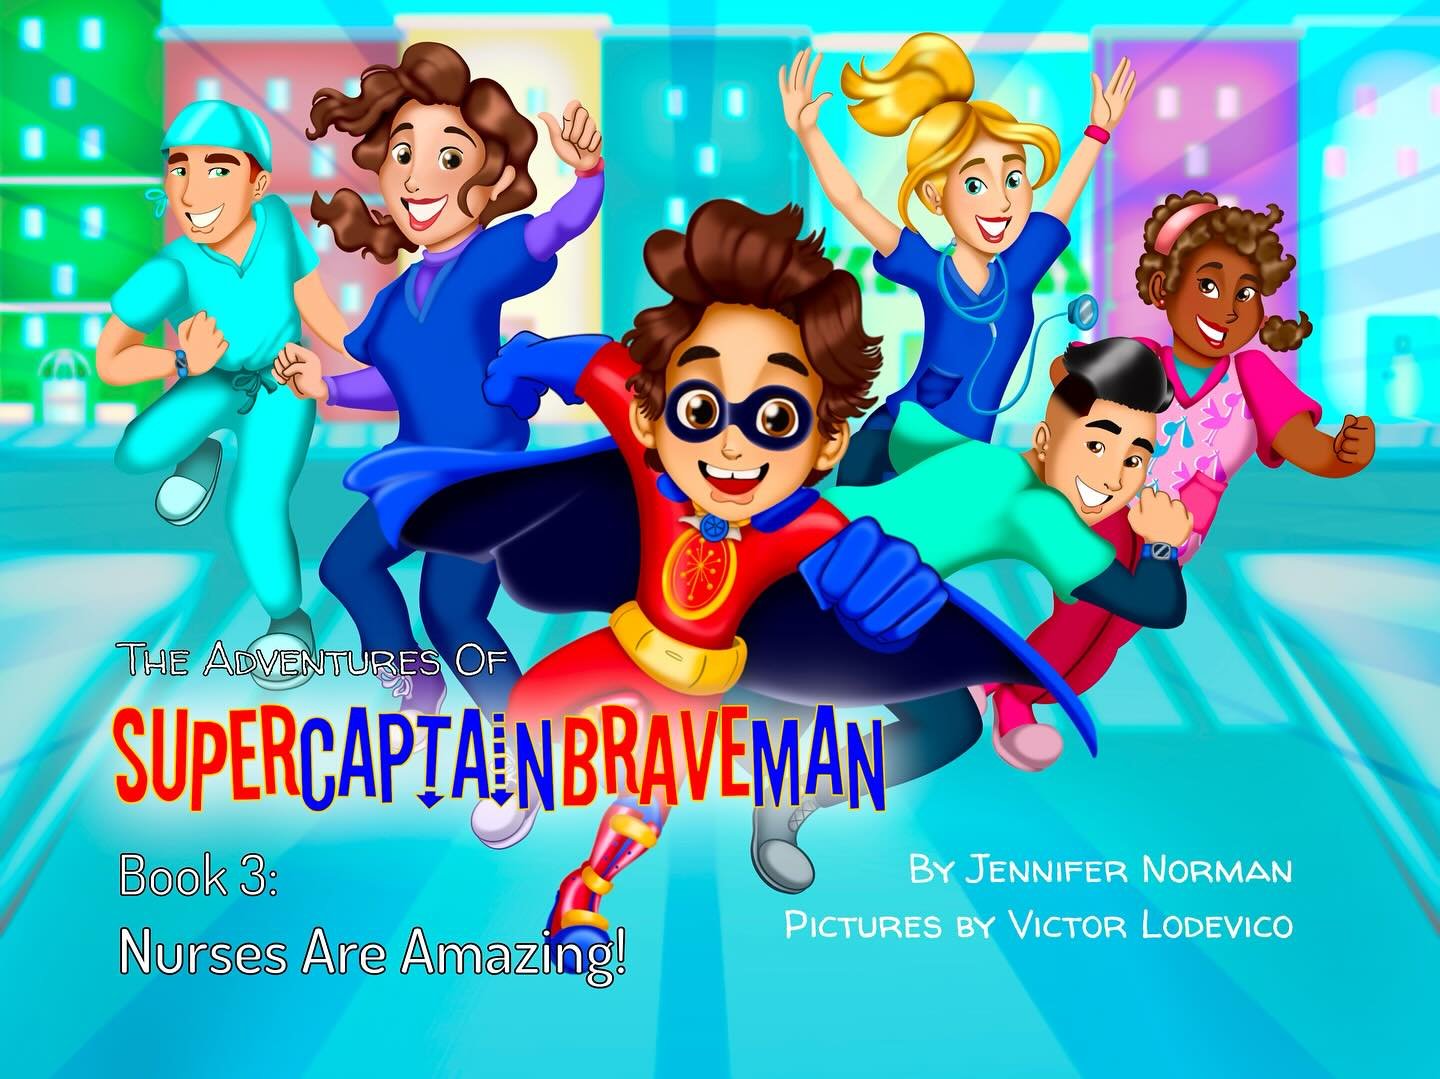 The second edition of The Adventures of SuperCaptainBraveMan Book 3: Nurses Are Amazing! is available now for your eReader! 🏥🩺🩻

Check it out at SuperCaptainBraveMan.com! 

#SuperCaptainBraveMan #childrensbooks #childrensbook #disability #nurse #n